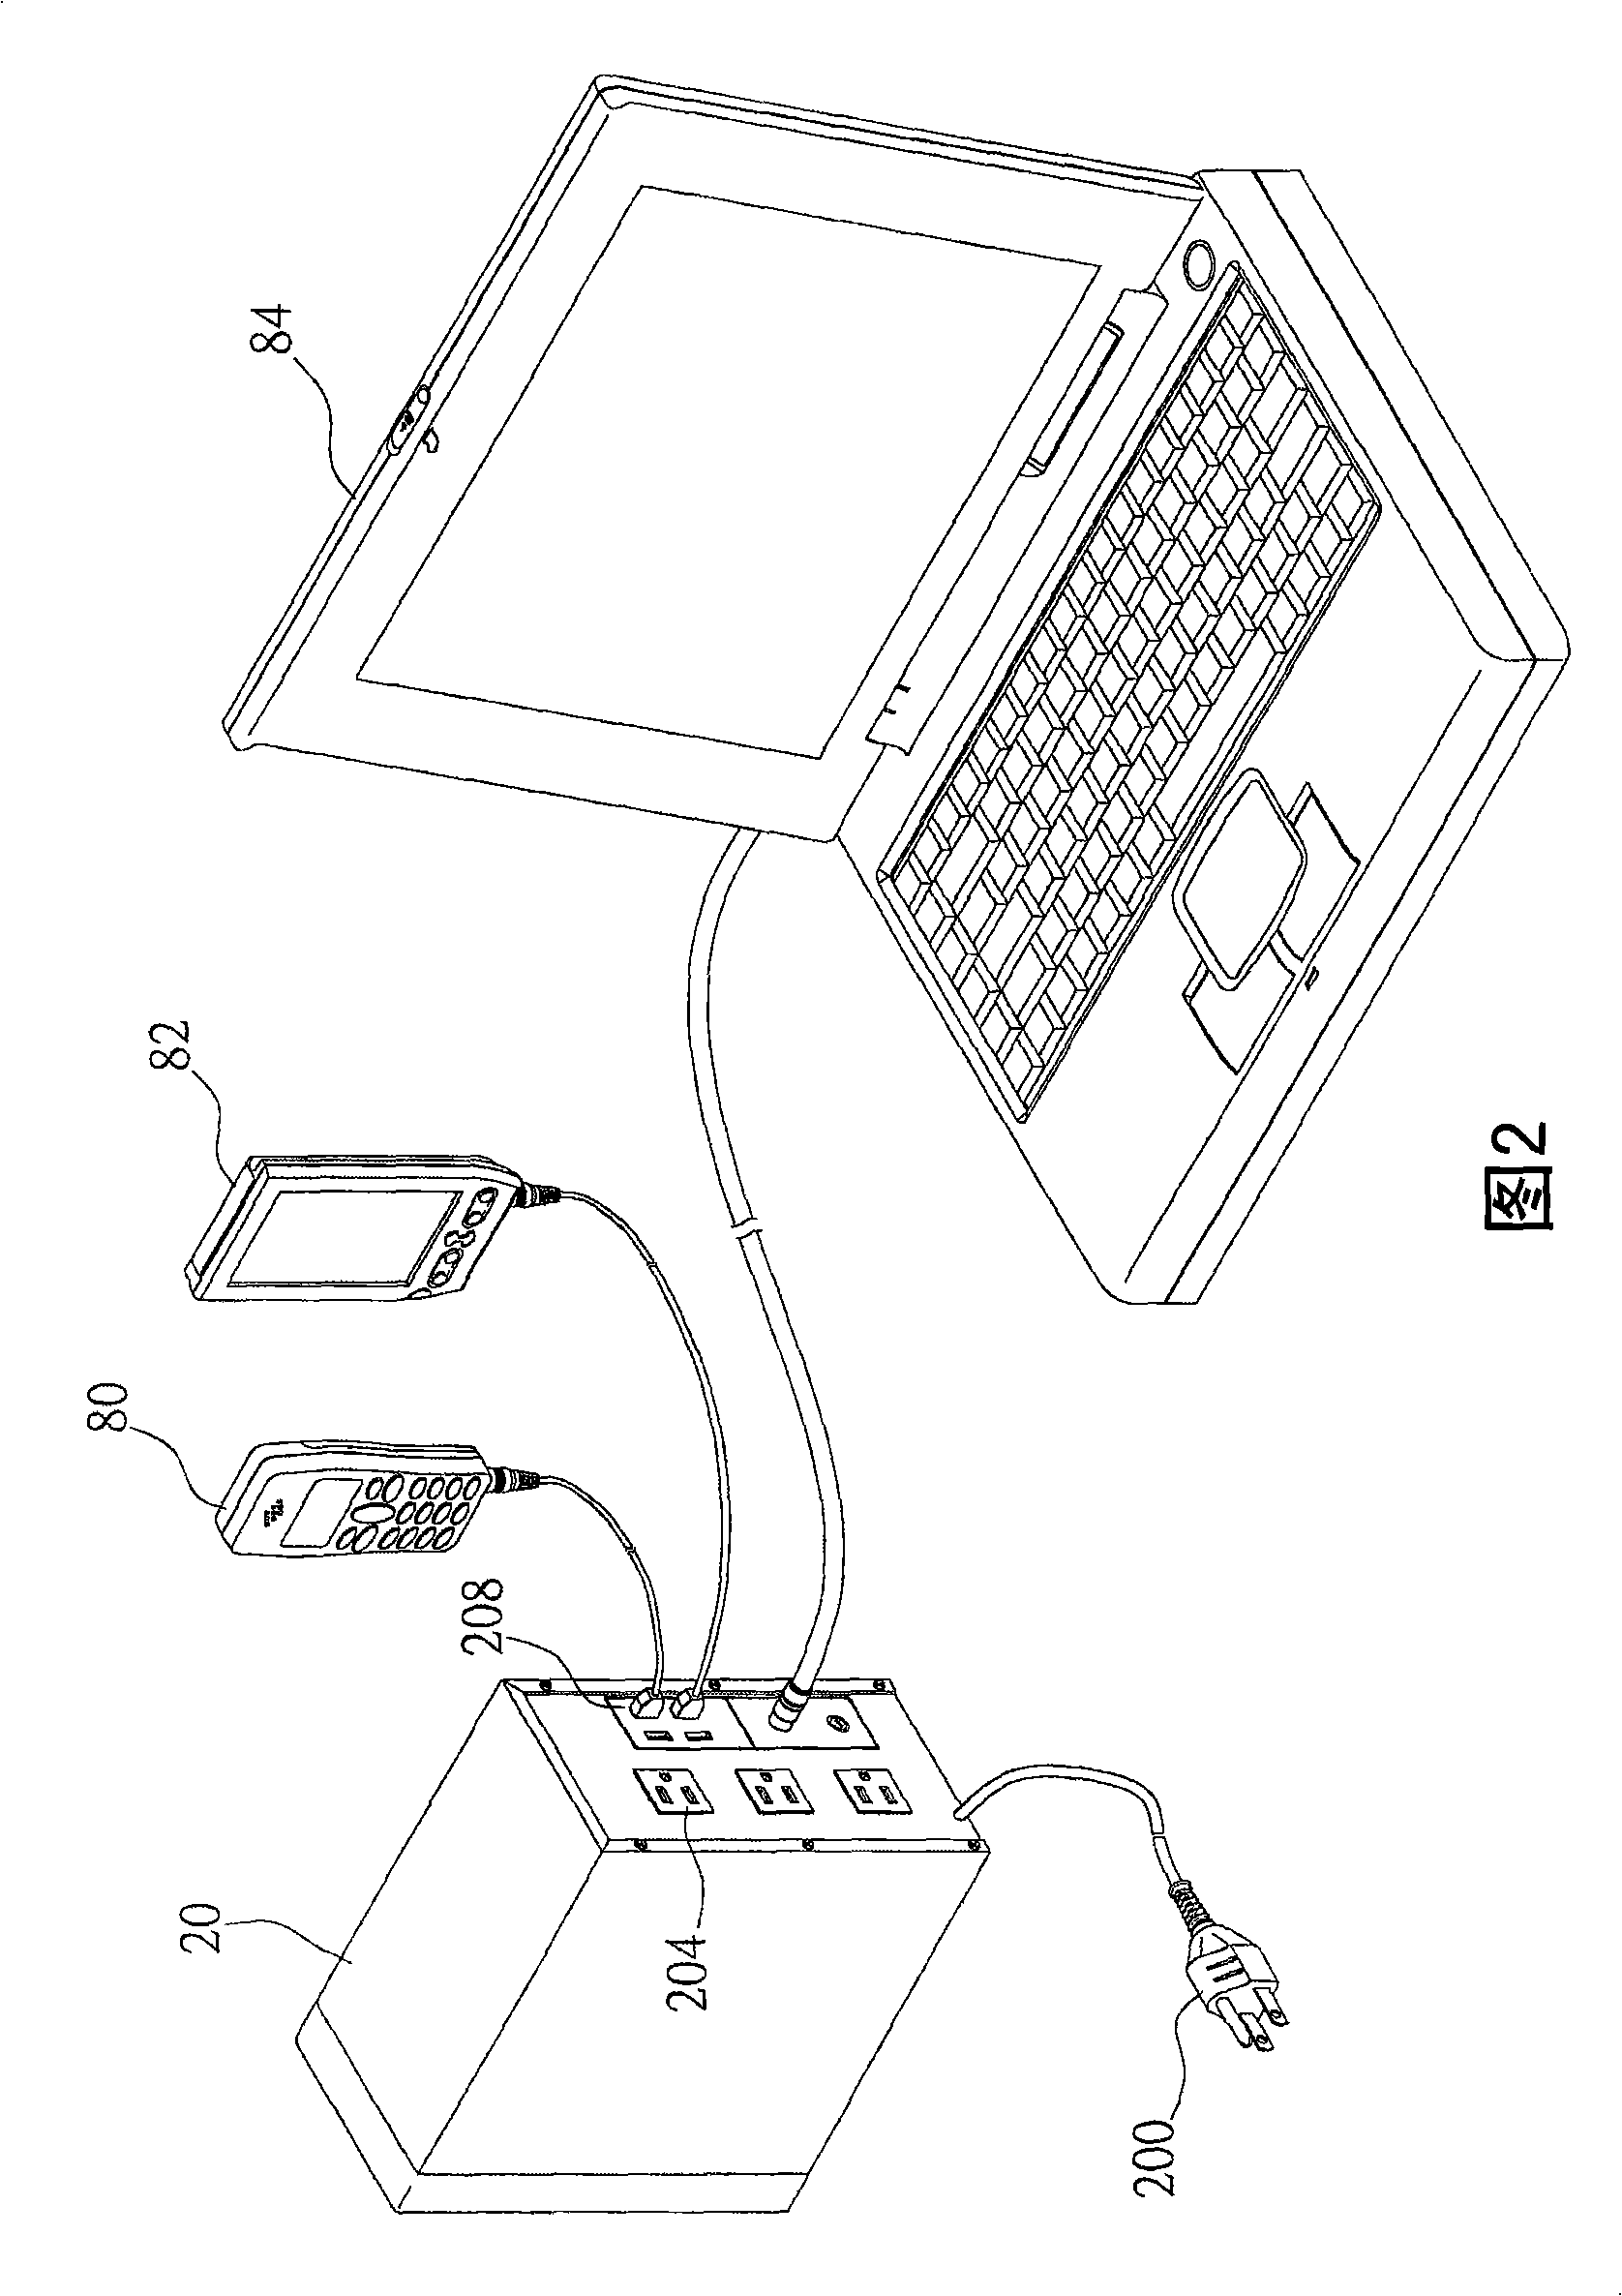 Composition energy-saving non power brake system and bidirectional transducer module as well as power transferring method